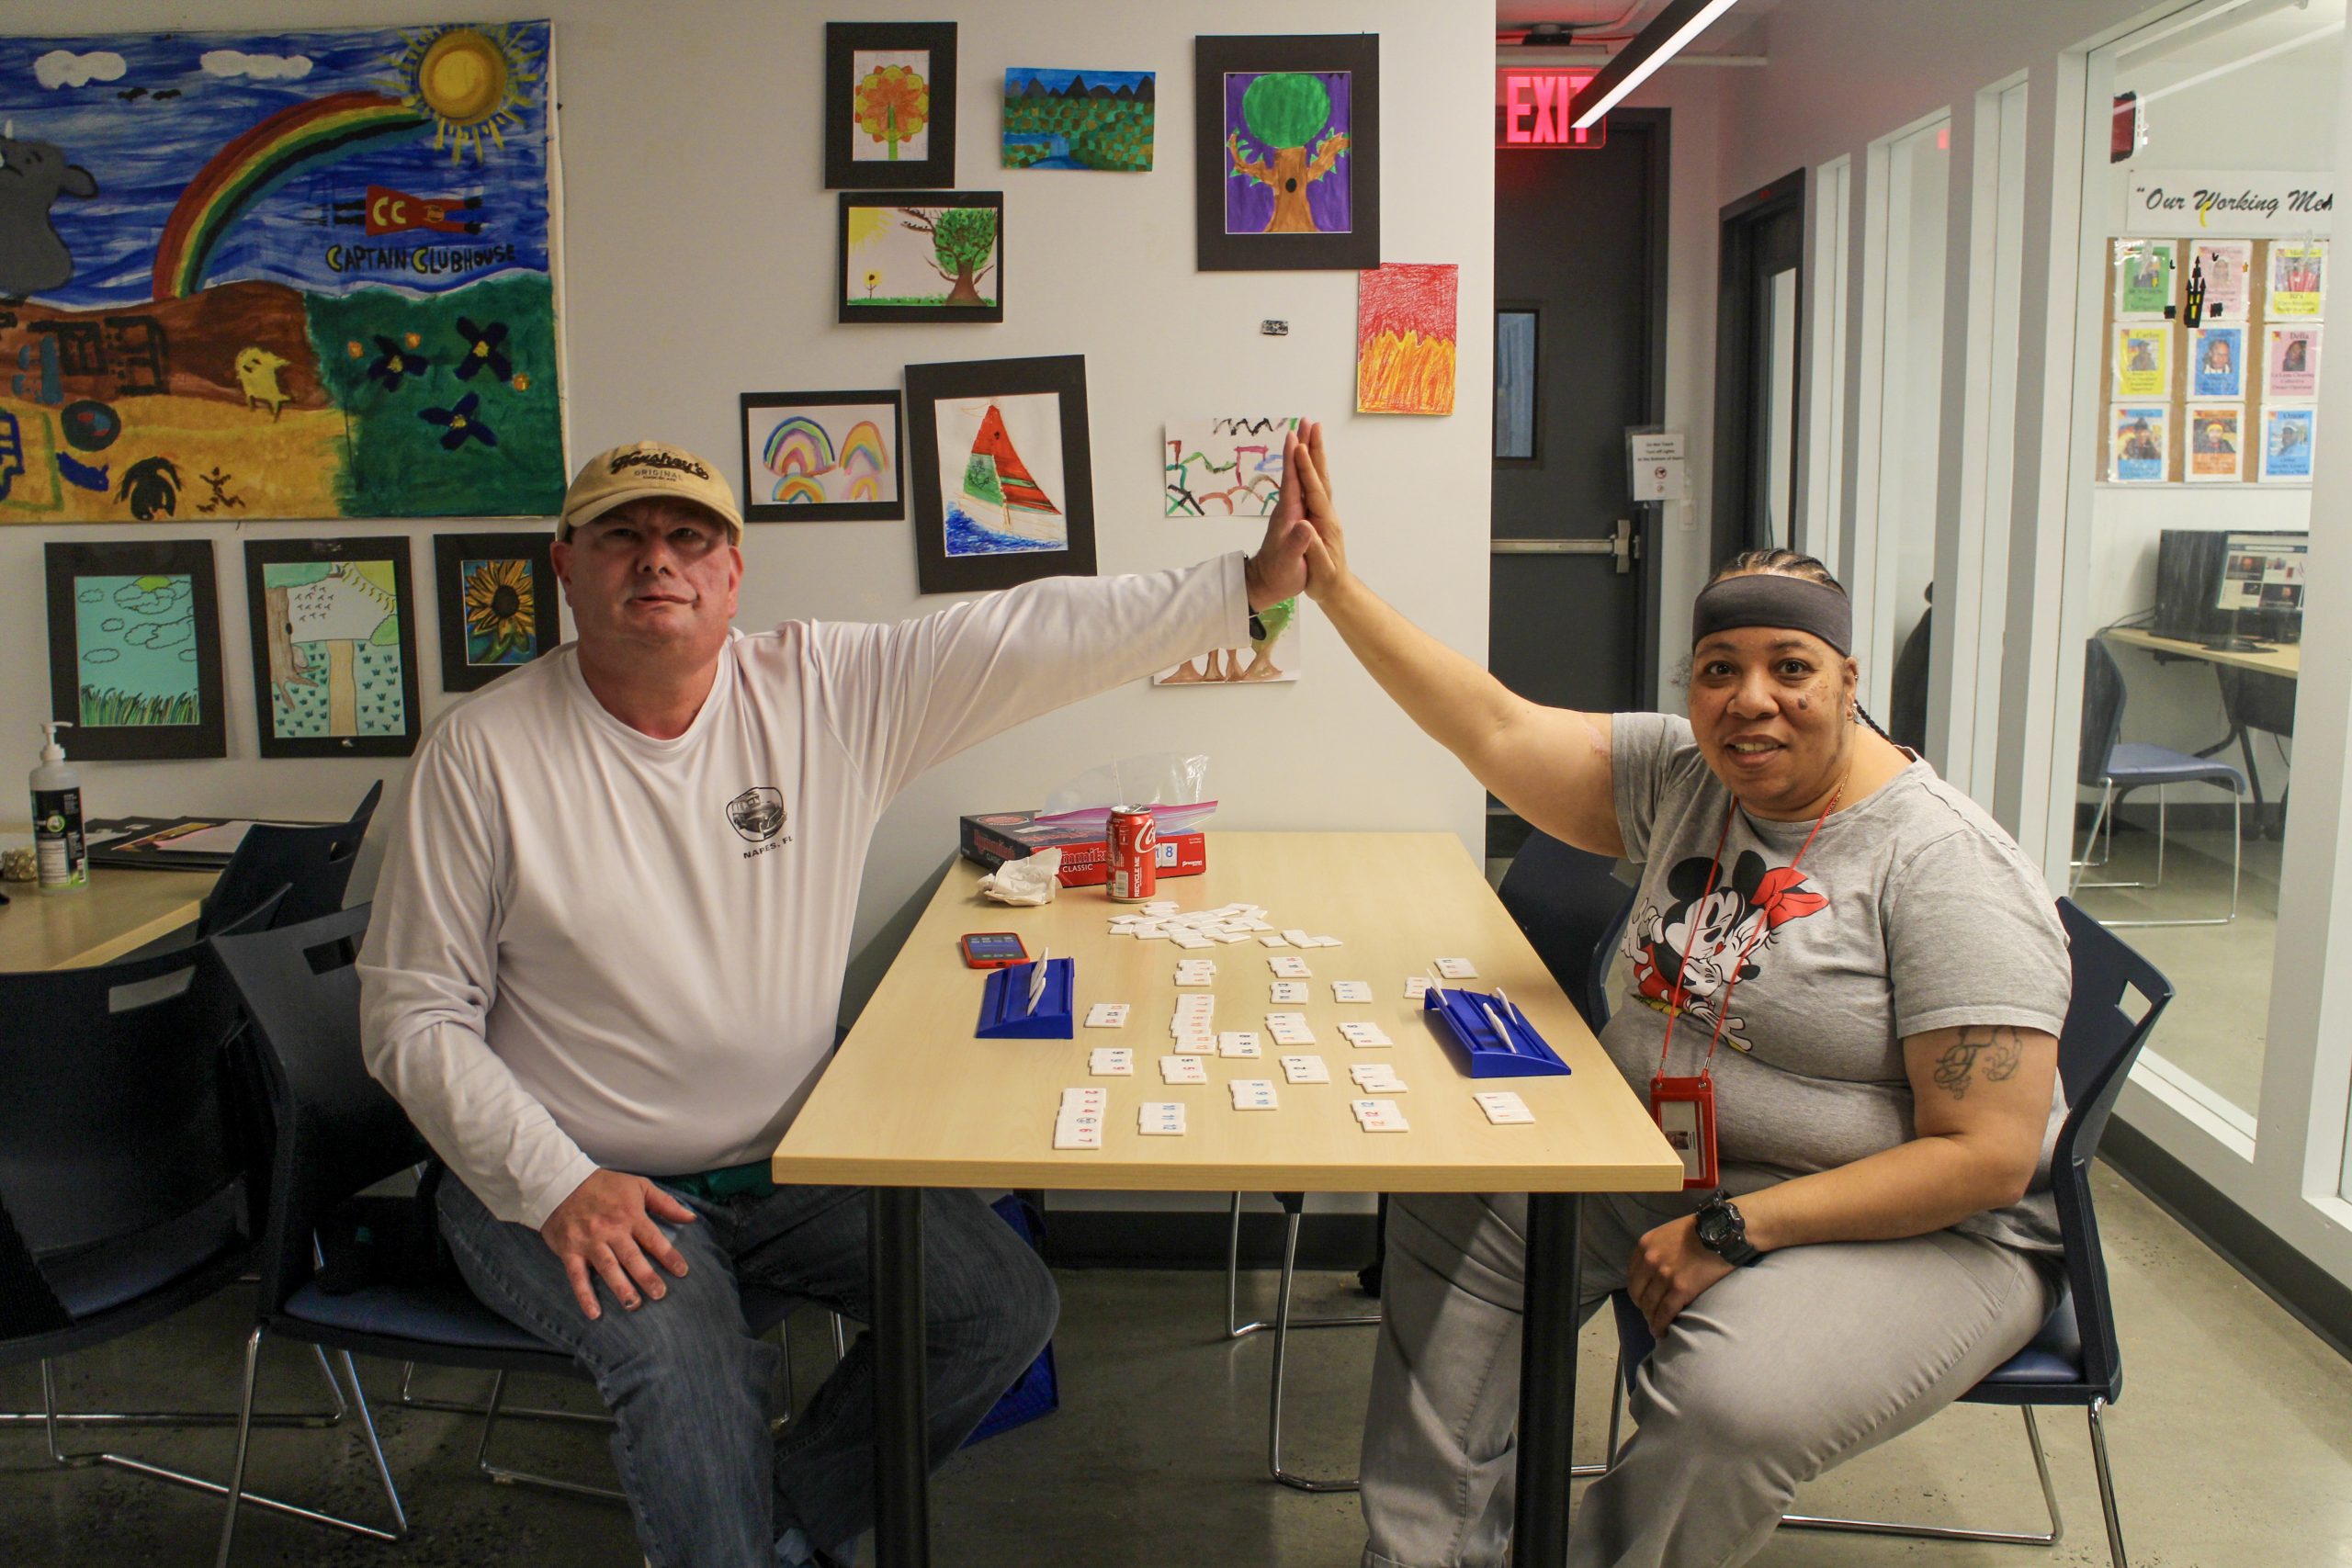 Two Clubhouse members giving each other a high five over the table while playing a game of Rumikub.